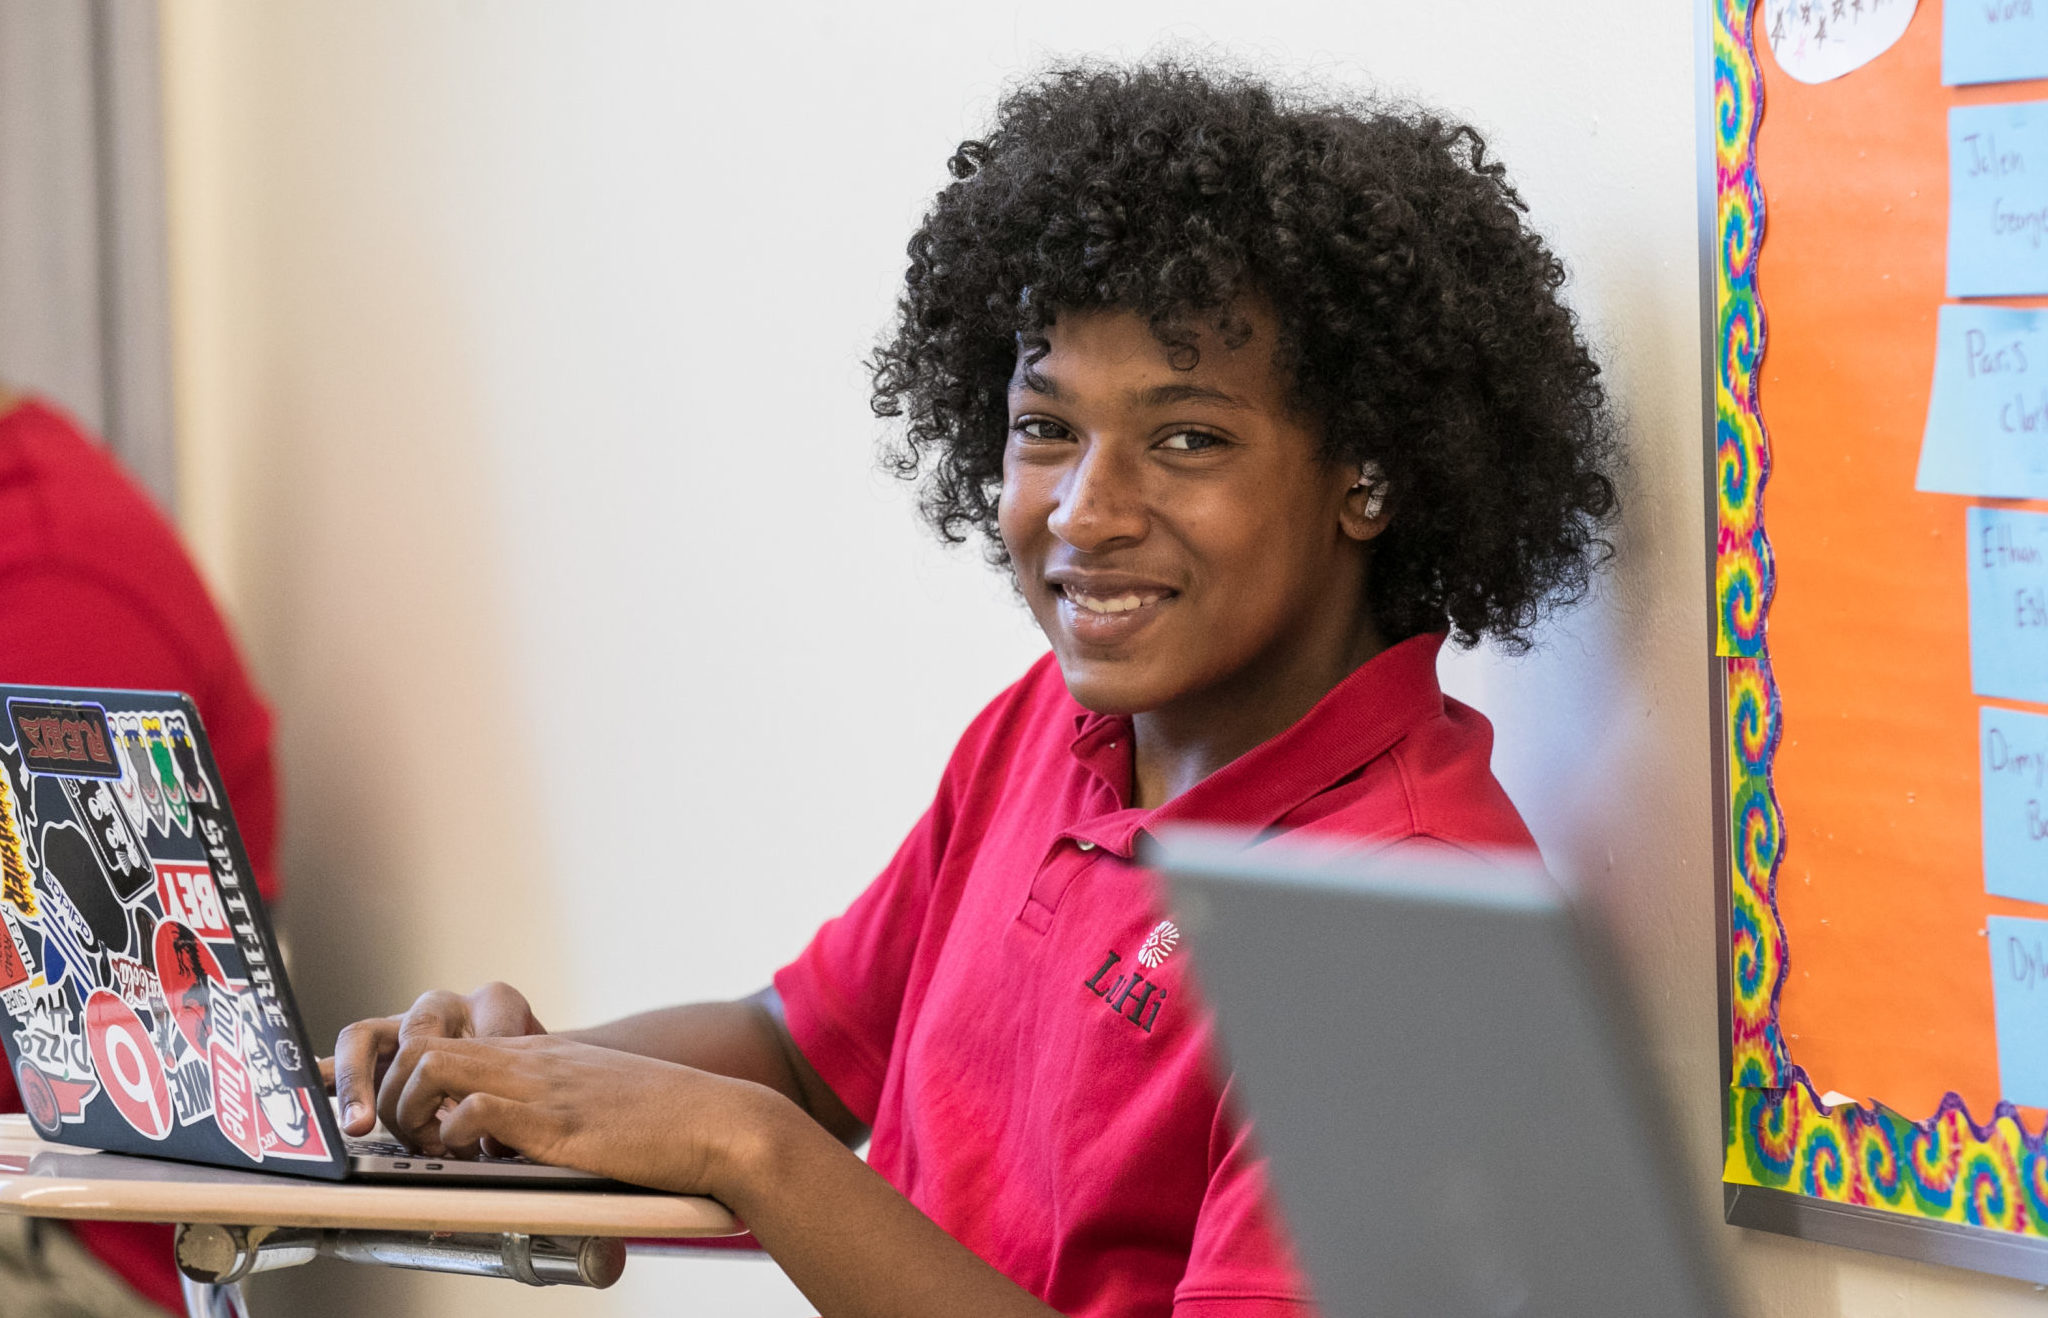 Student smiling in class using his computer